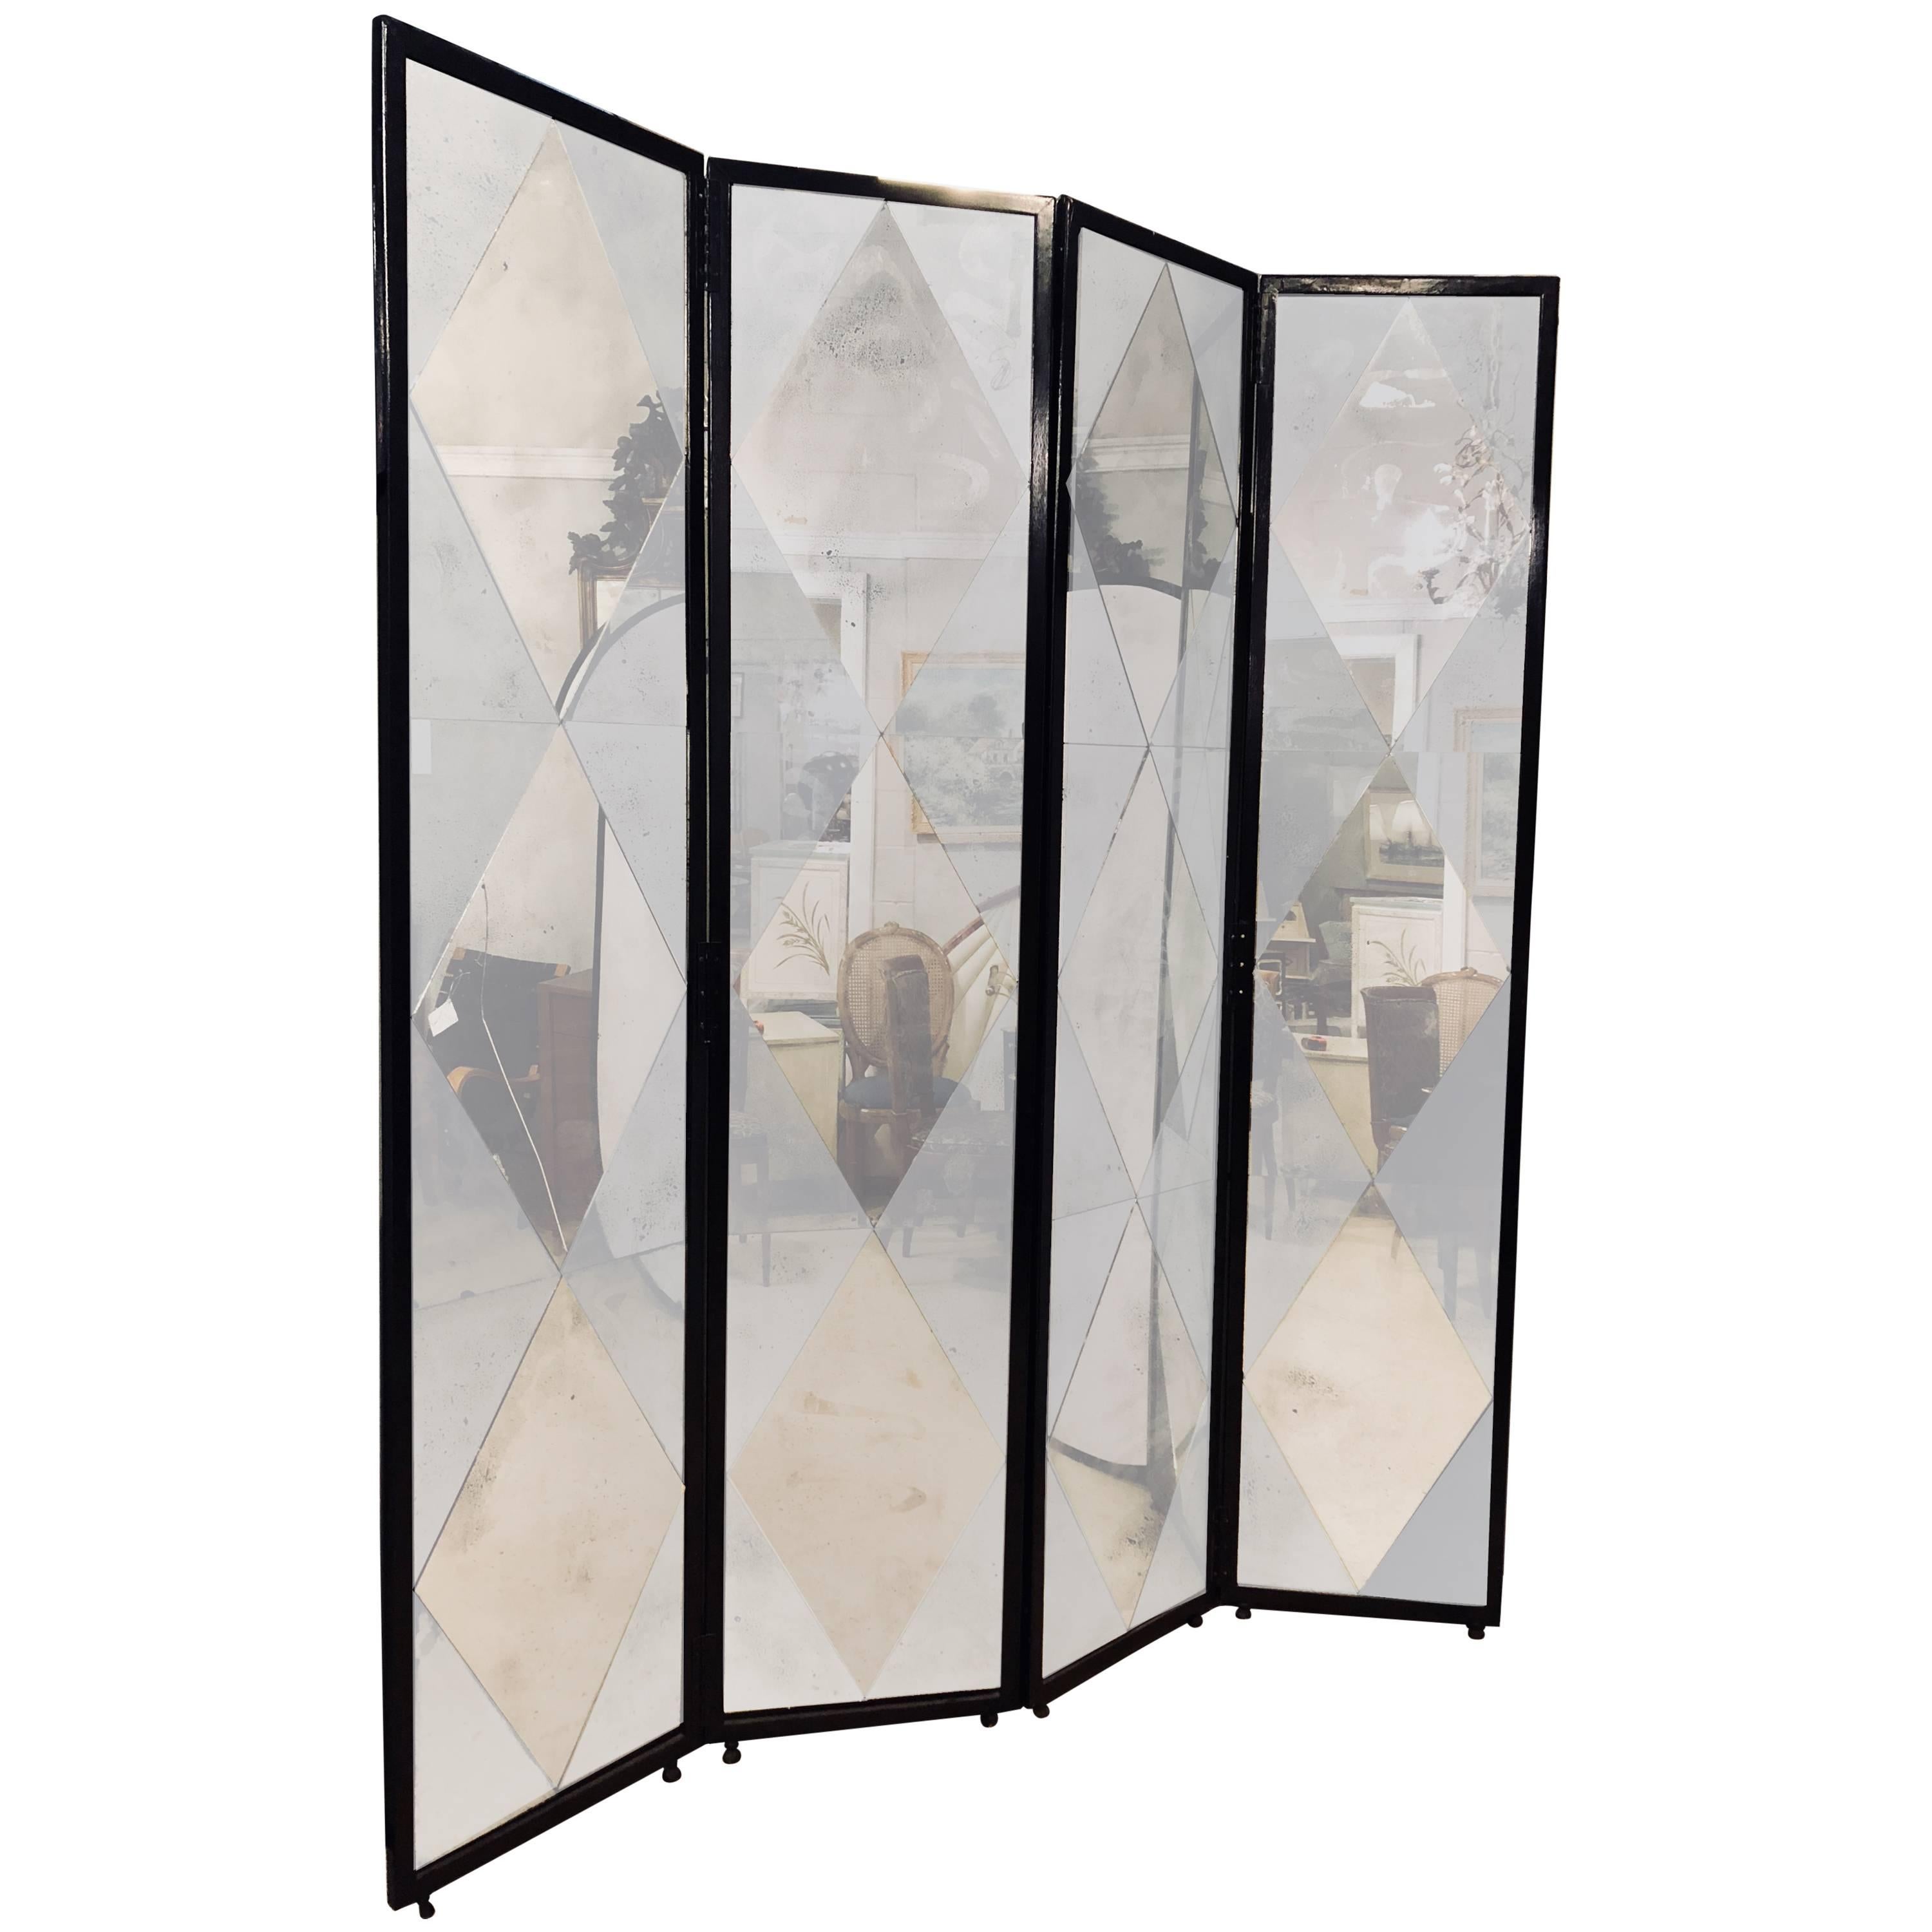 Four Panel Double Sided Floor Screen or Room Divider Distressed Diamond Mirror